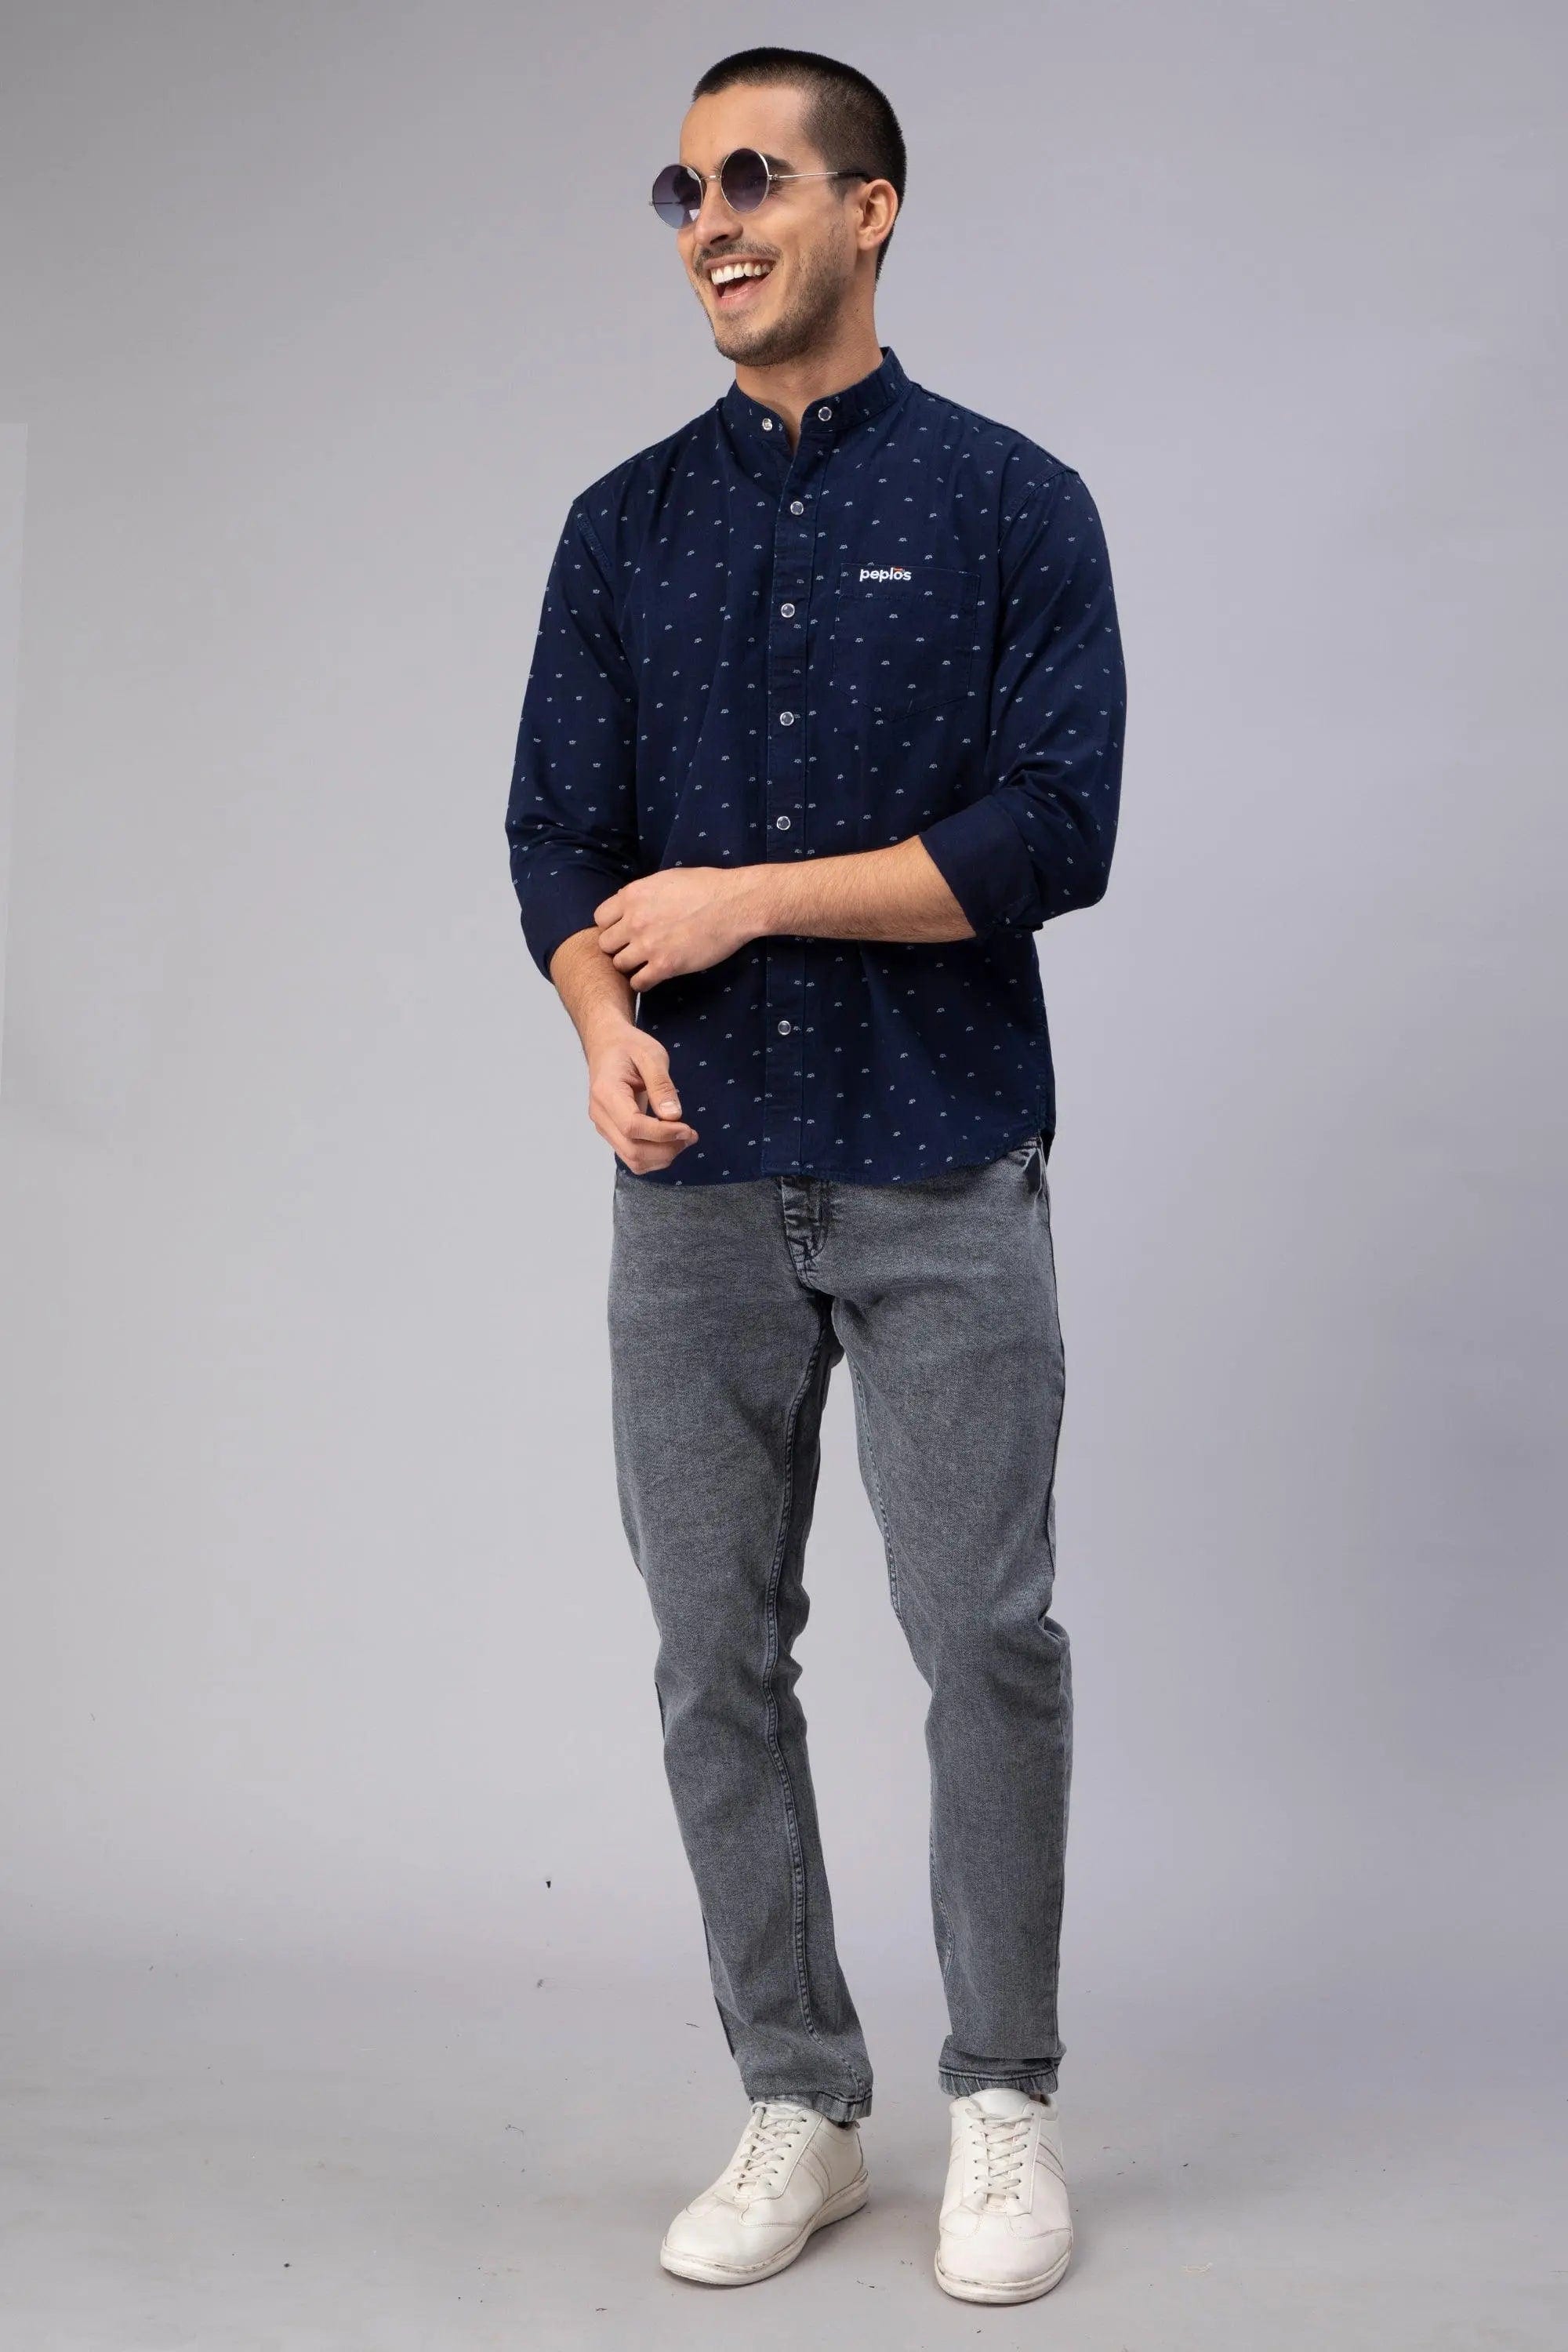 Jeans Shirt And Pants at Best Price in Coimbatore | River John Nyc Fashion